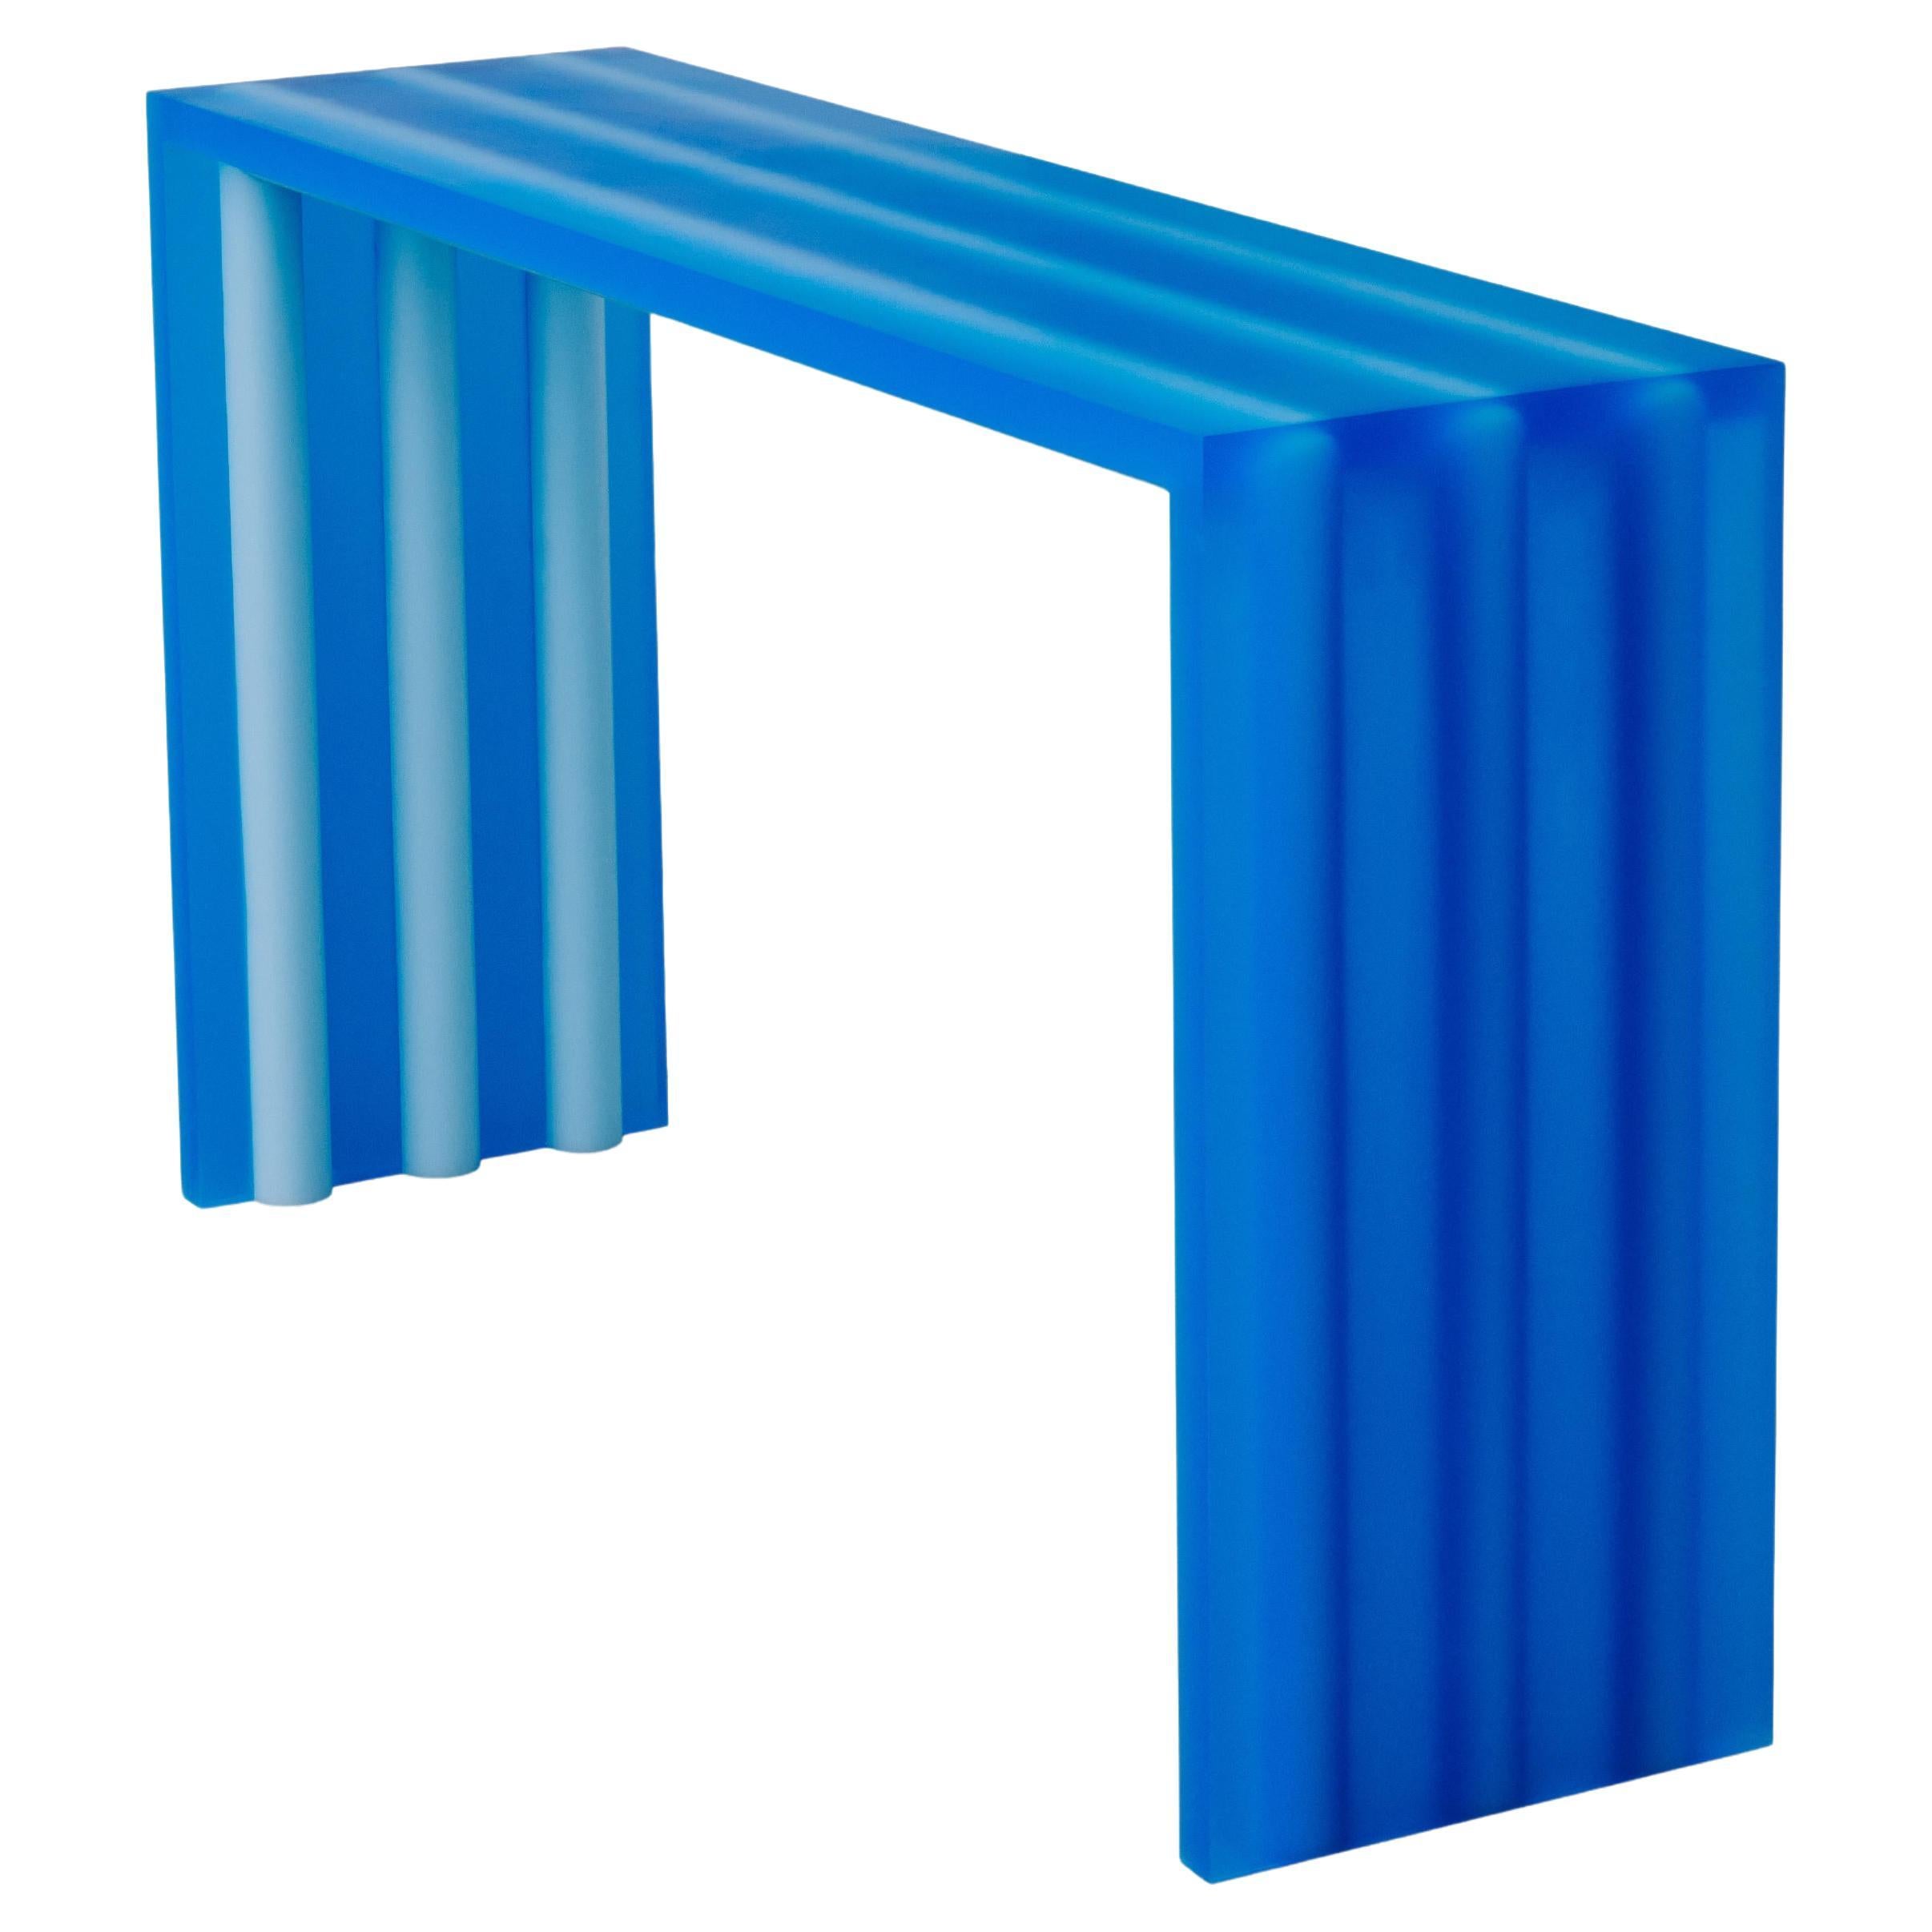 Tube Resin Console/Console Table in Blue by Facture, REP by Tuleste Factory For Sale